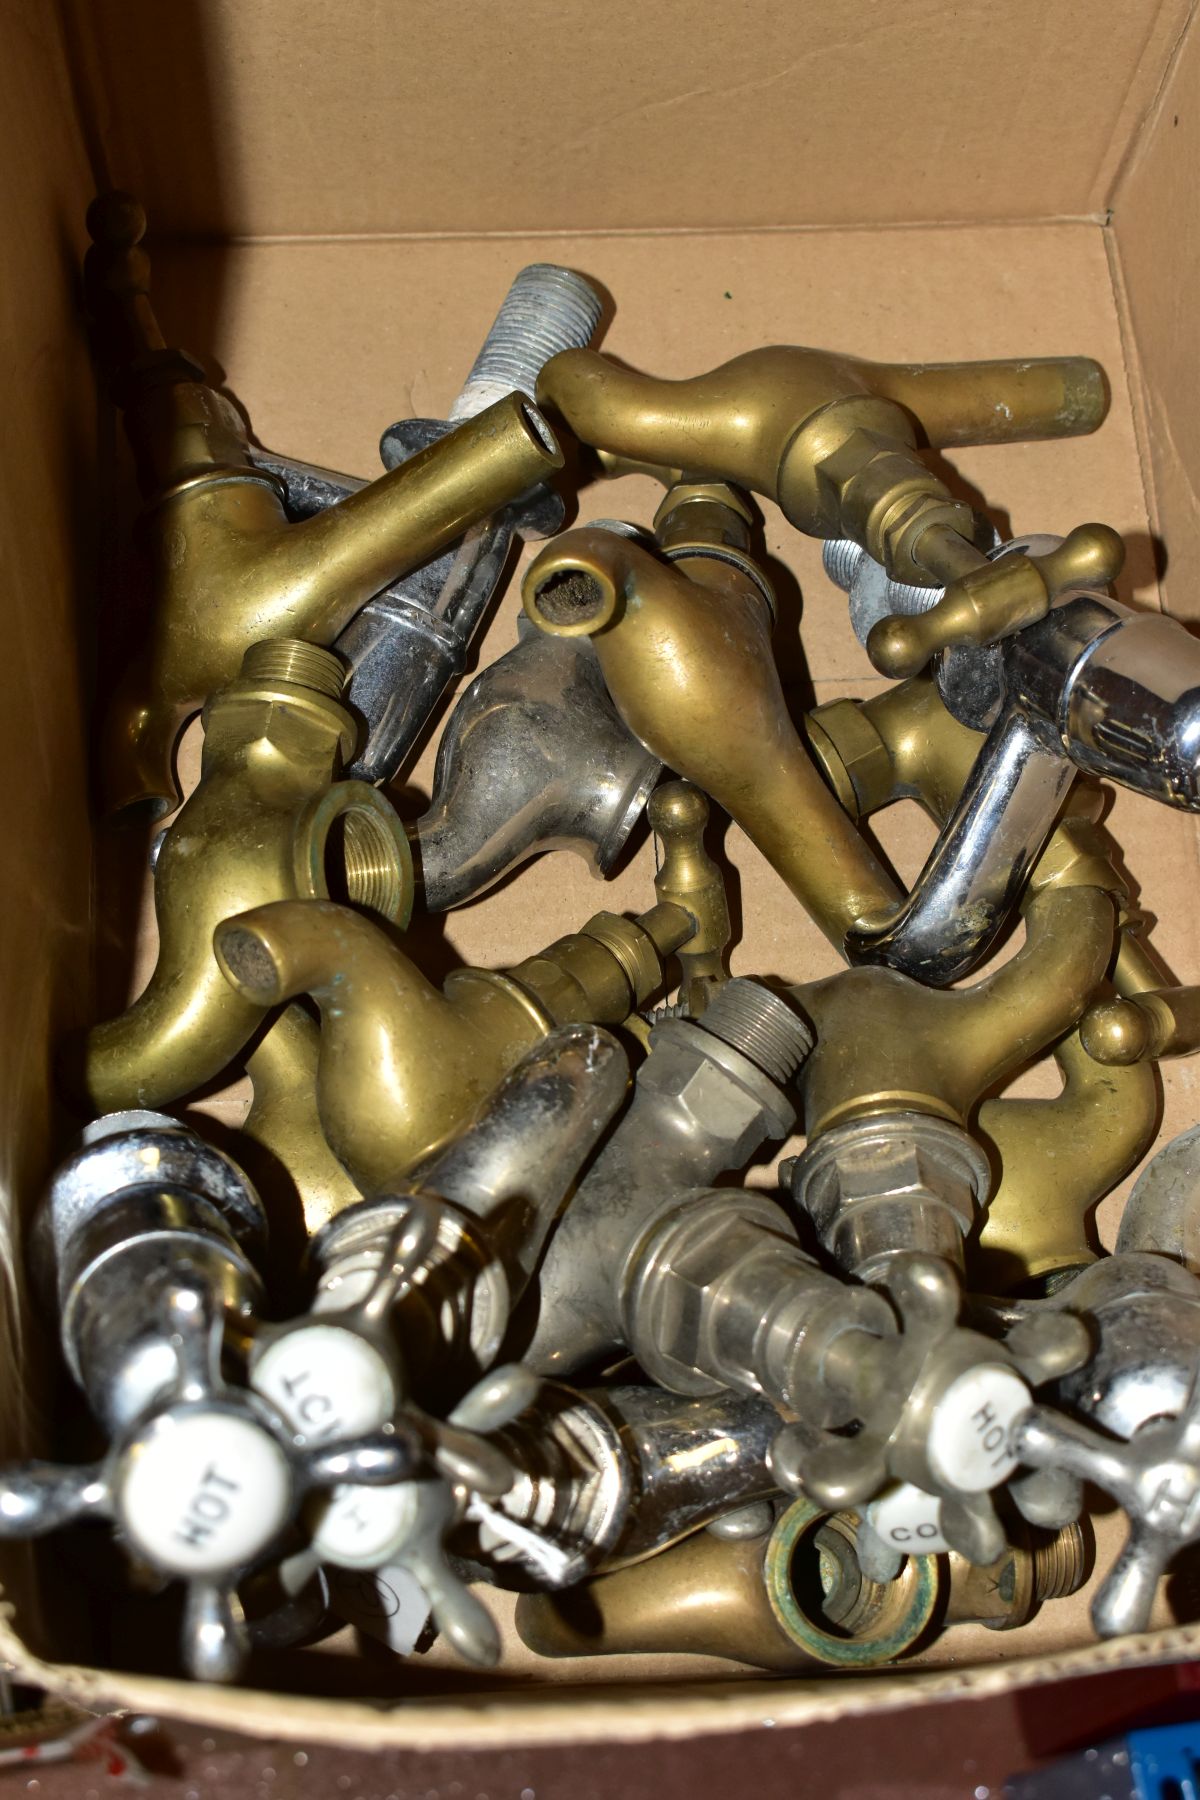 A BOX OF TAPS AND TAP PARTS, including brass taps, stainless steel finished taps, some having